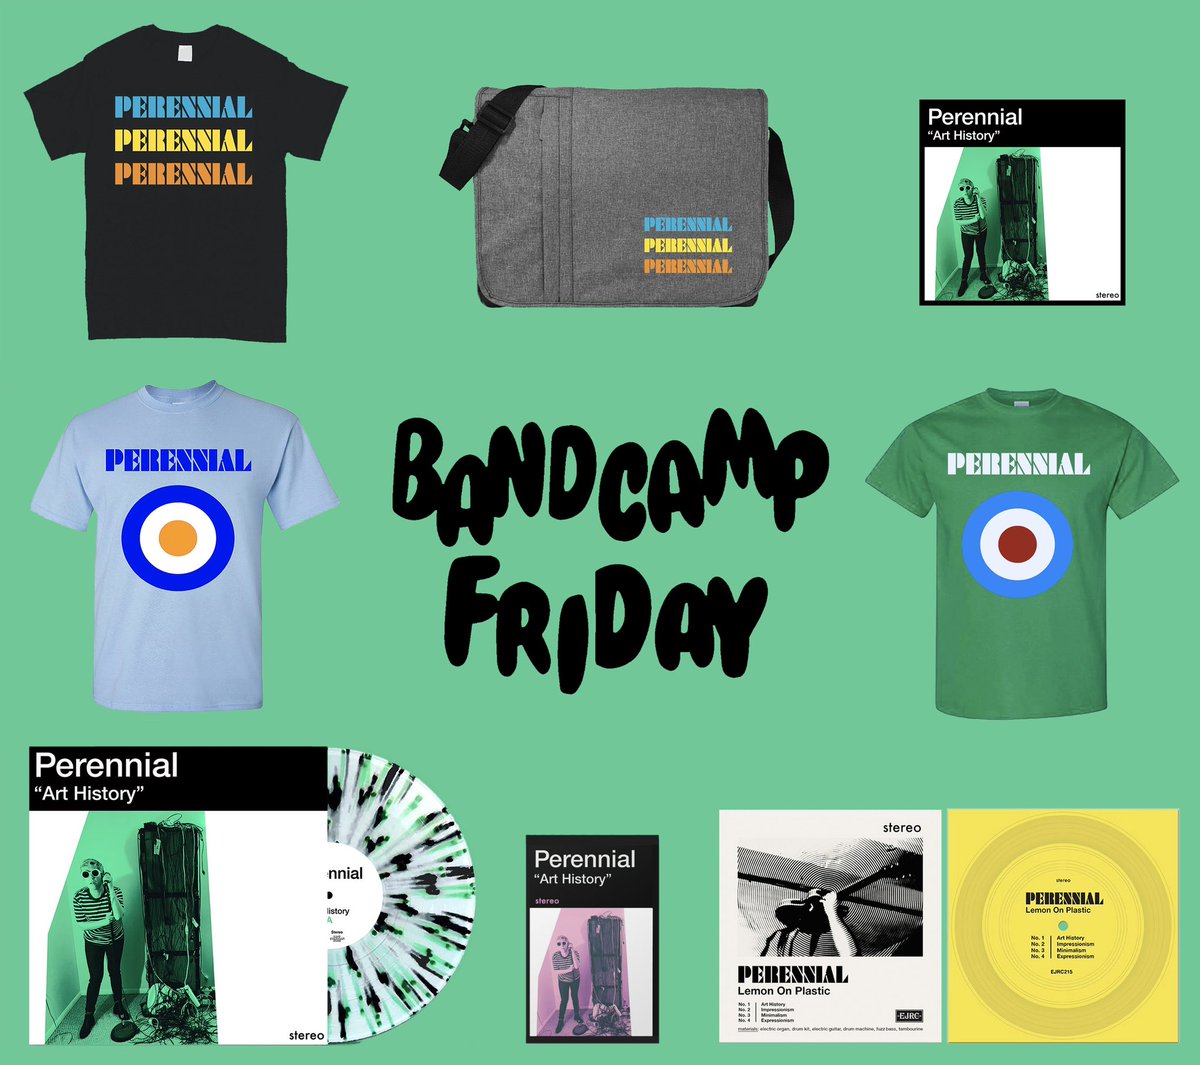 Today is Bandcamp Friday! 100% of sales today go directly to artists, including preorders of our new album, ‘Art History’! perennialtheband.bandcamp.com/album/art-hist…